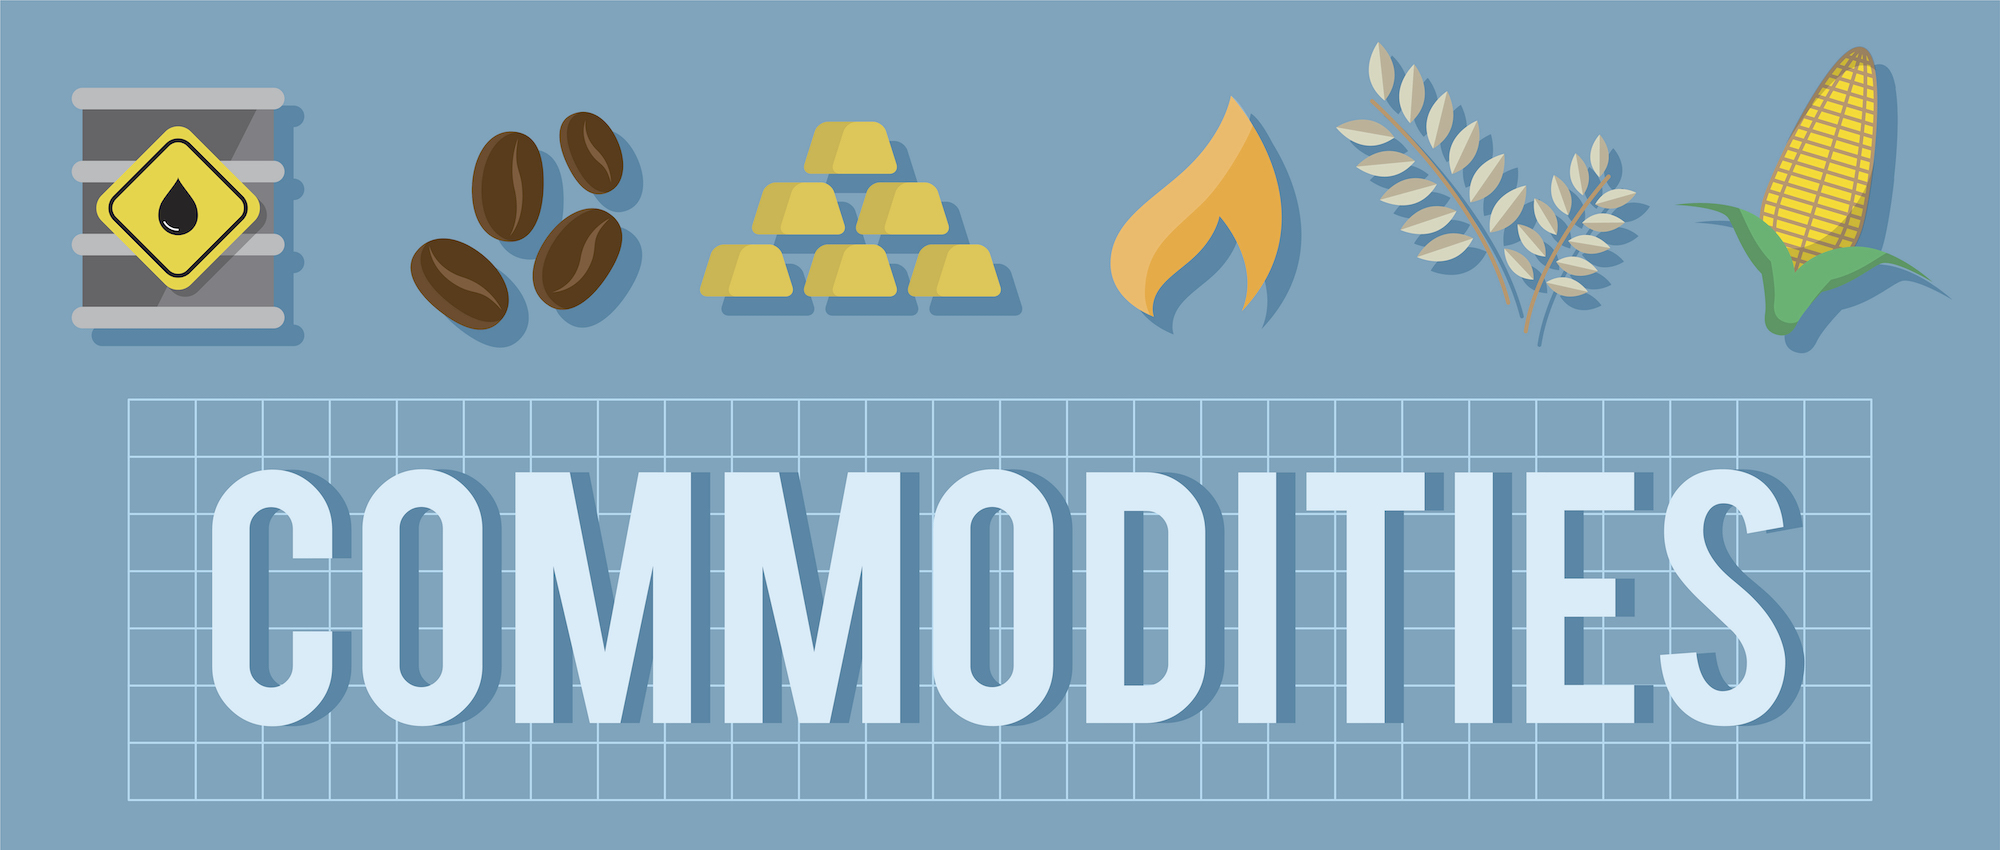 Examples of different commodities, including gold